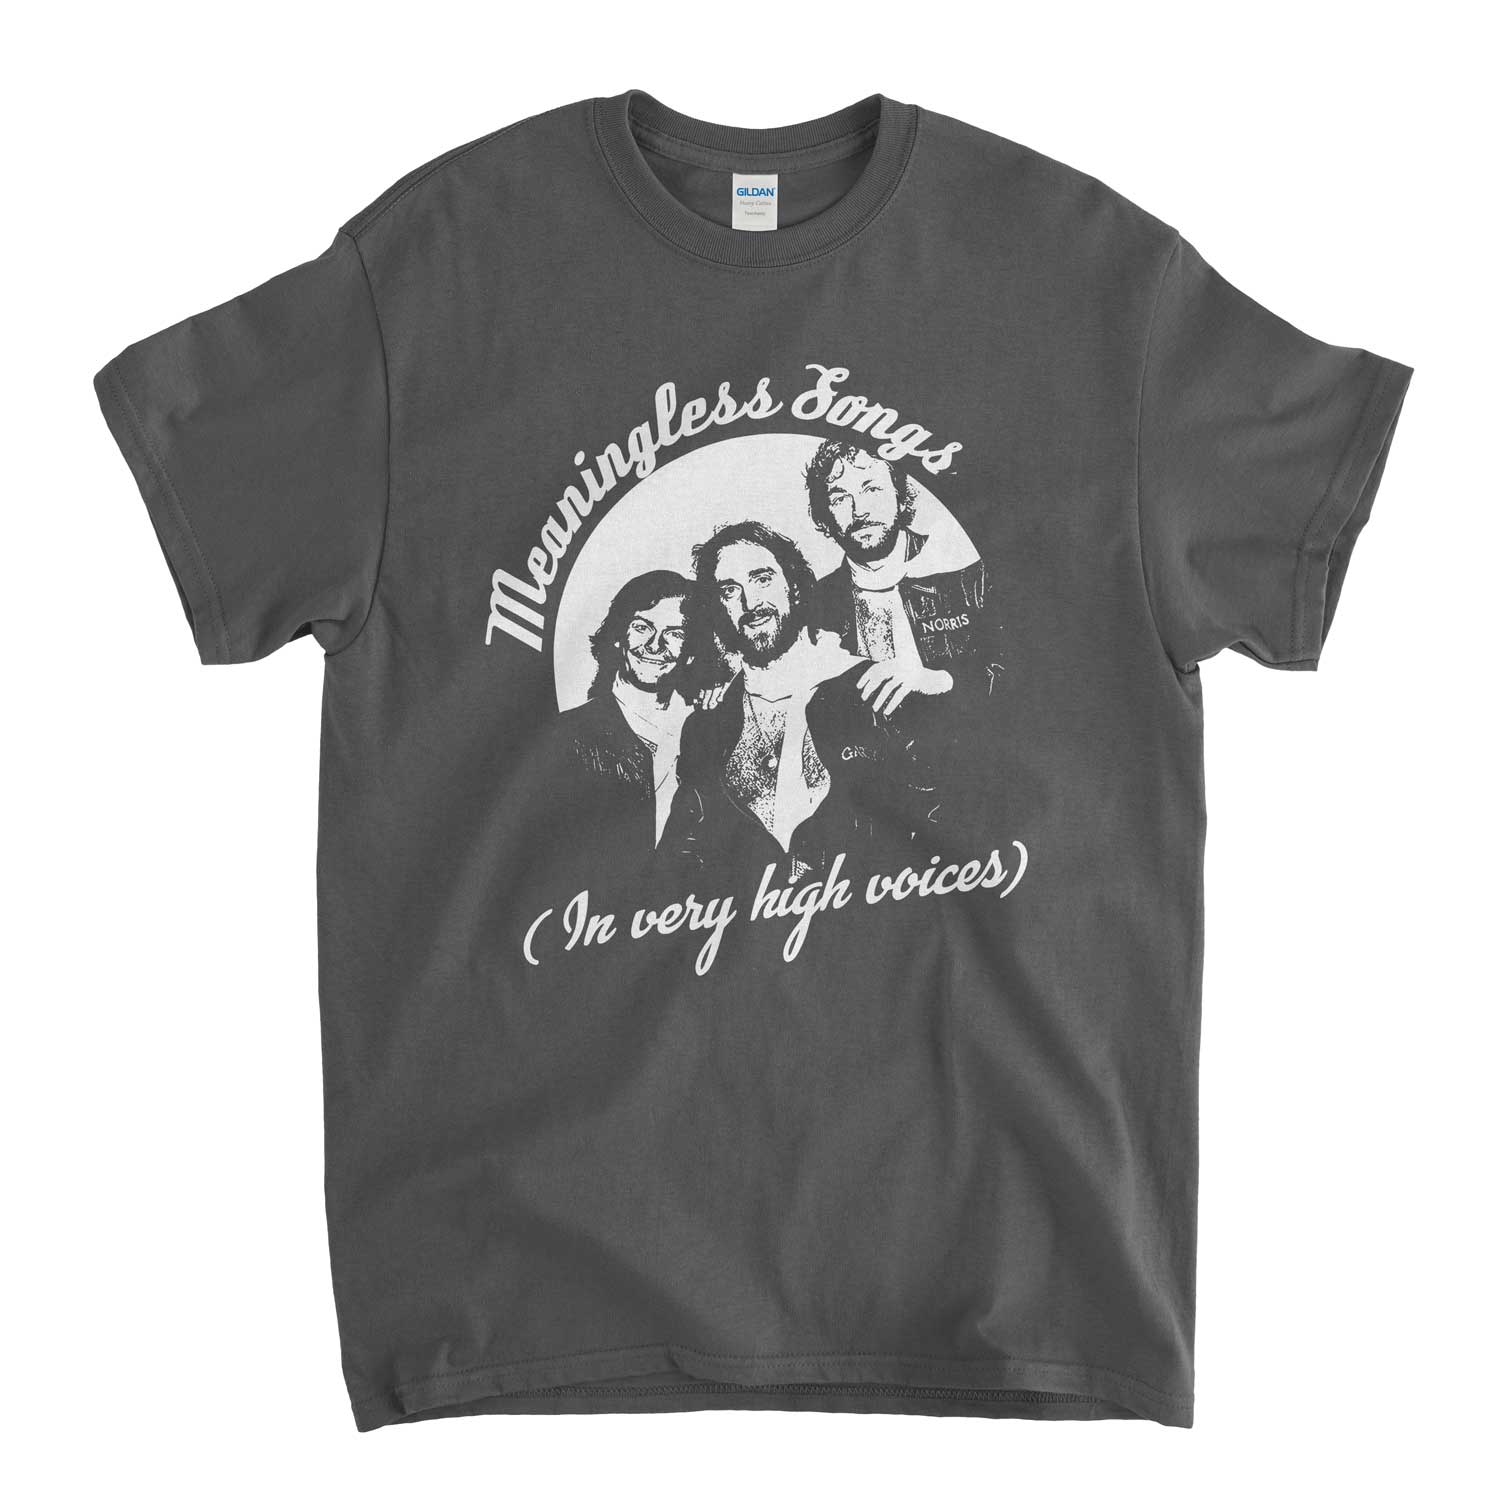 A Tribute to the Hee Bee Gee Bees T Shirt - Meaningless Songs In Very High Voices